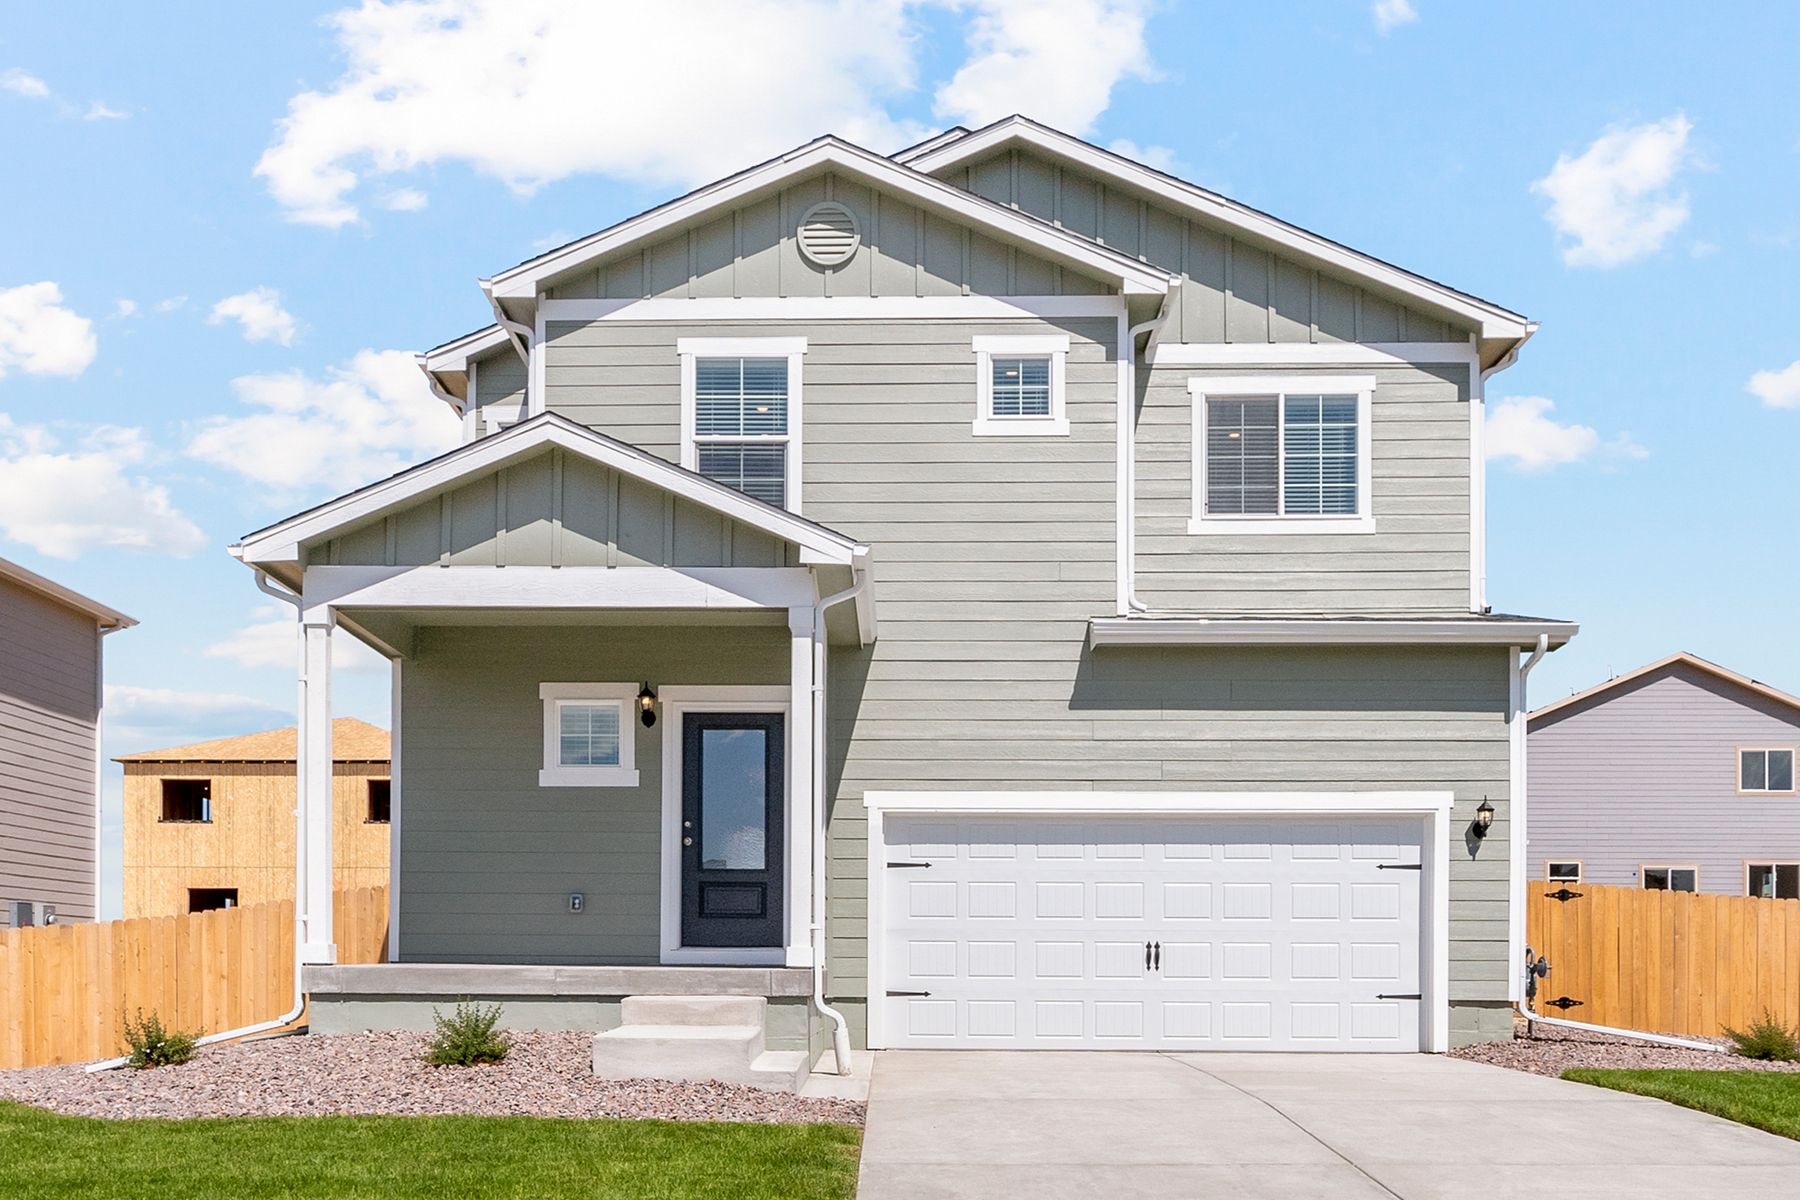 The Rio Grande by LGI Homes:The Rio Grande is a beautiful two-story home.